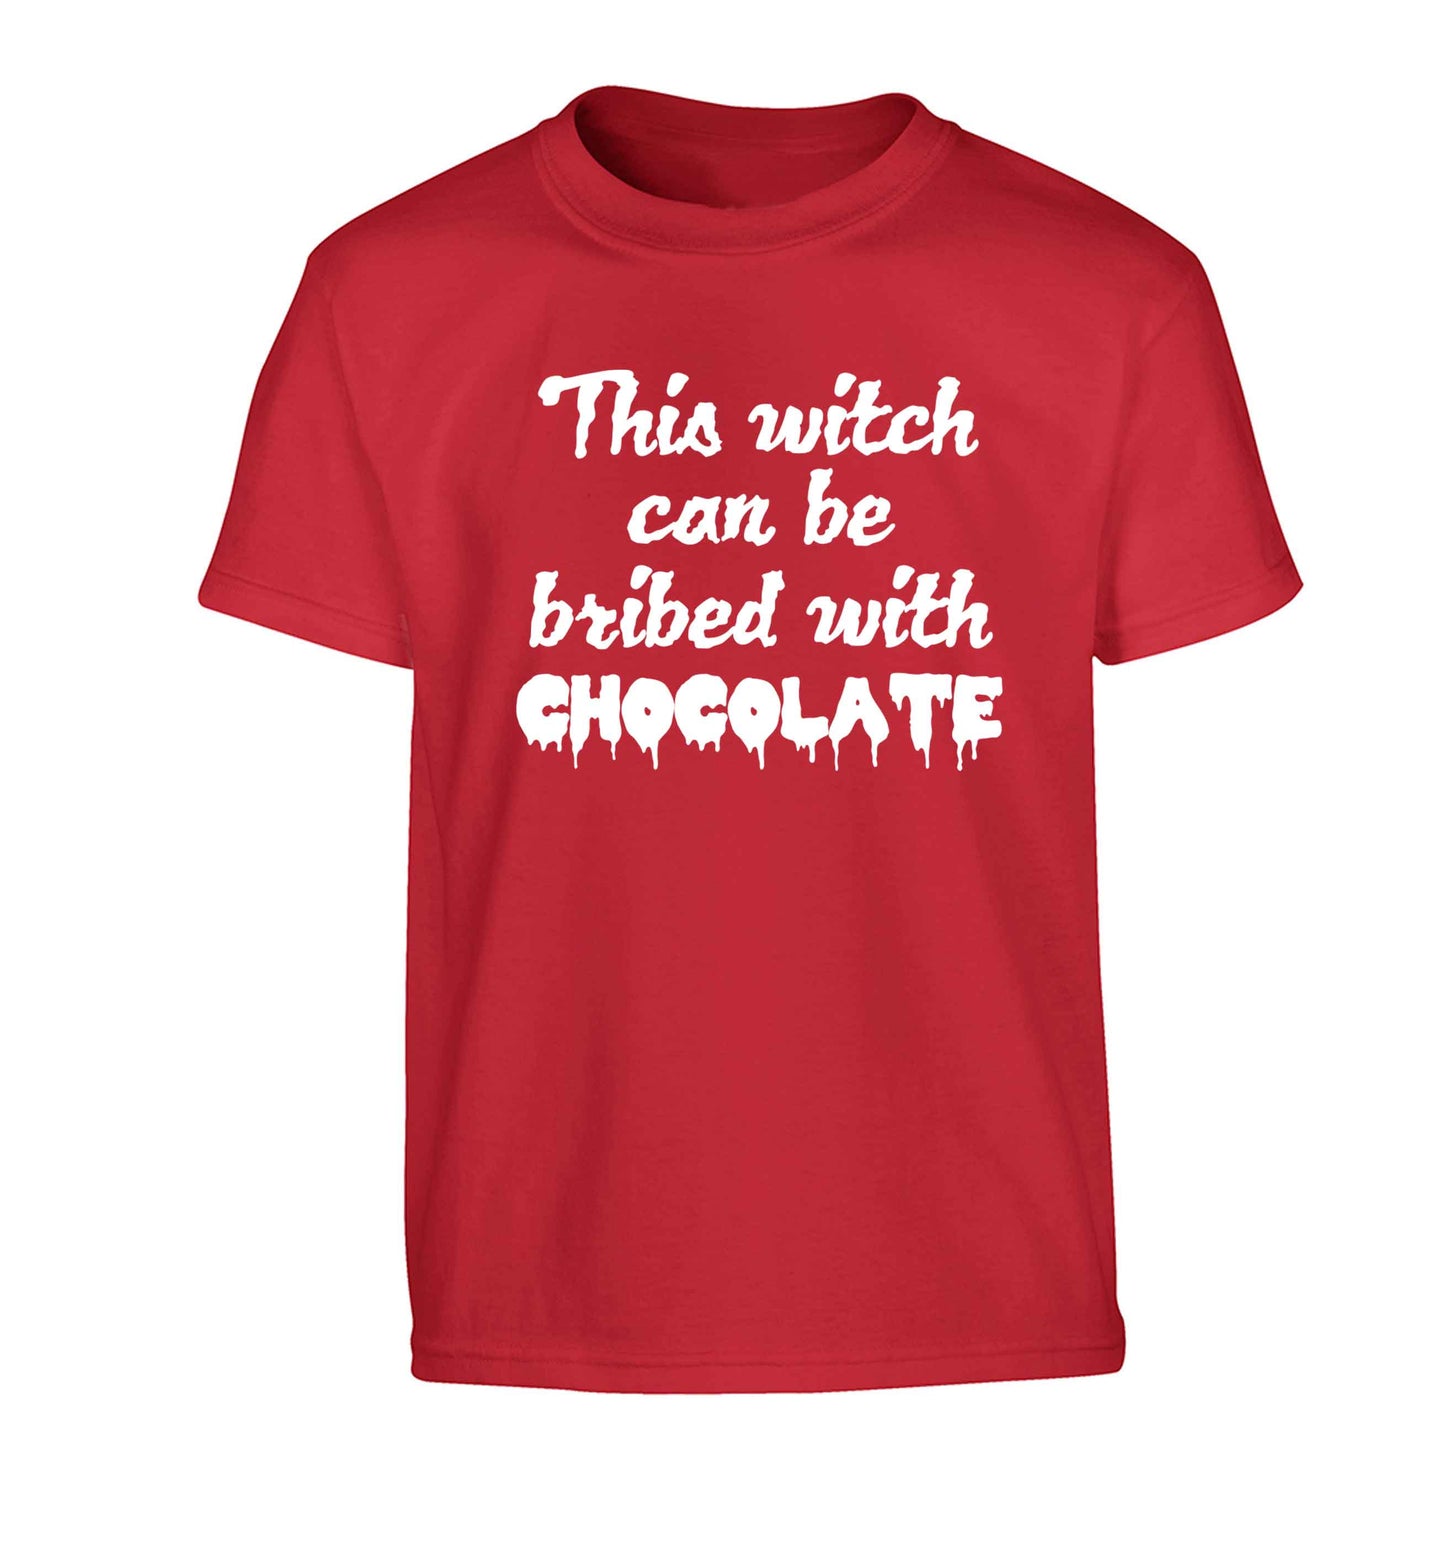 This witch can be bribed with chocolate Children's red Tshirt 12-13 Years